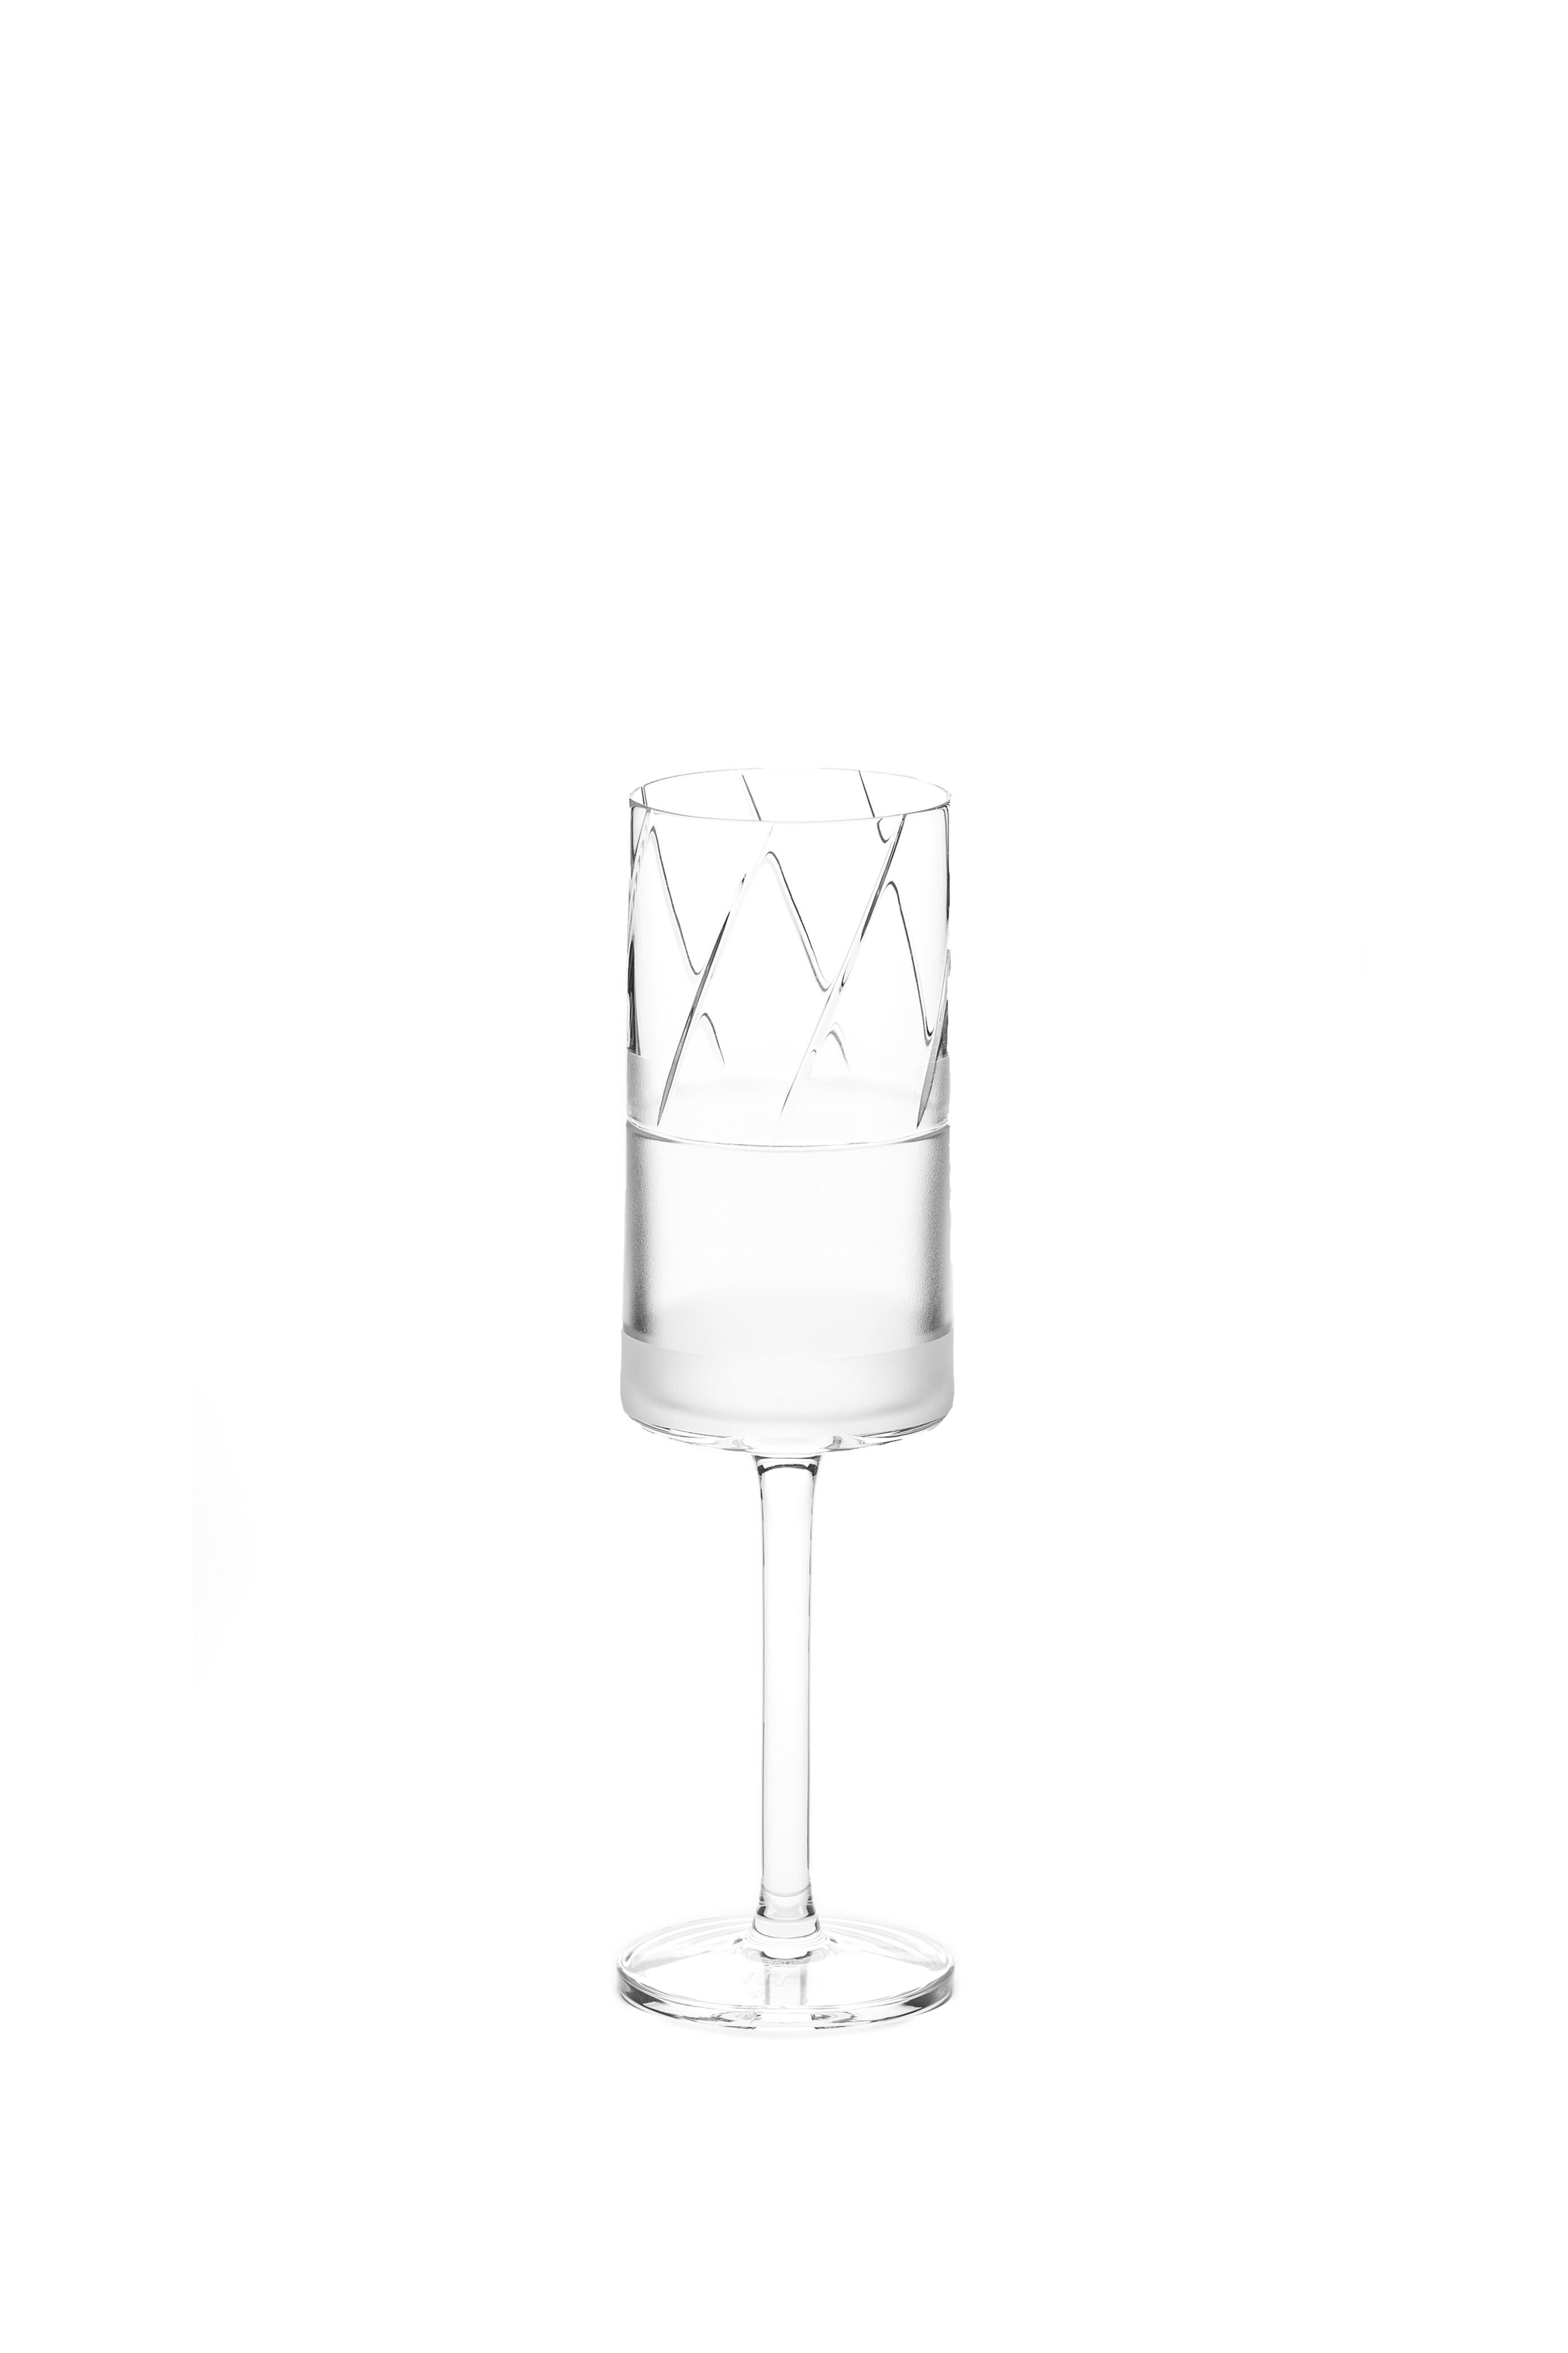 A champagne glass made by hand
Glass designed by Scholten & Baijings as part of our 'ELEMENTS' series.

The Collection: Elements
A rich canon of graphic markings defines the ELEMENTS series of lead crystal. Cuts and textures of varying depth and